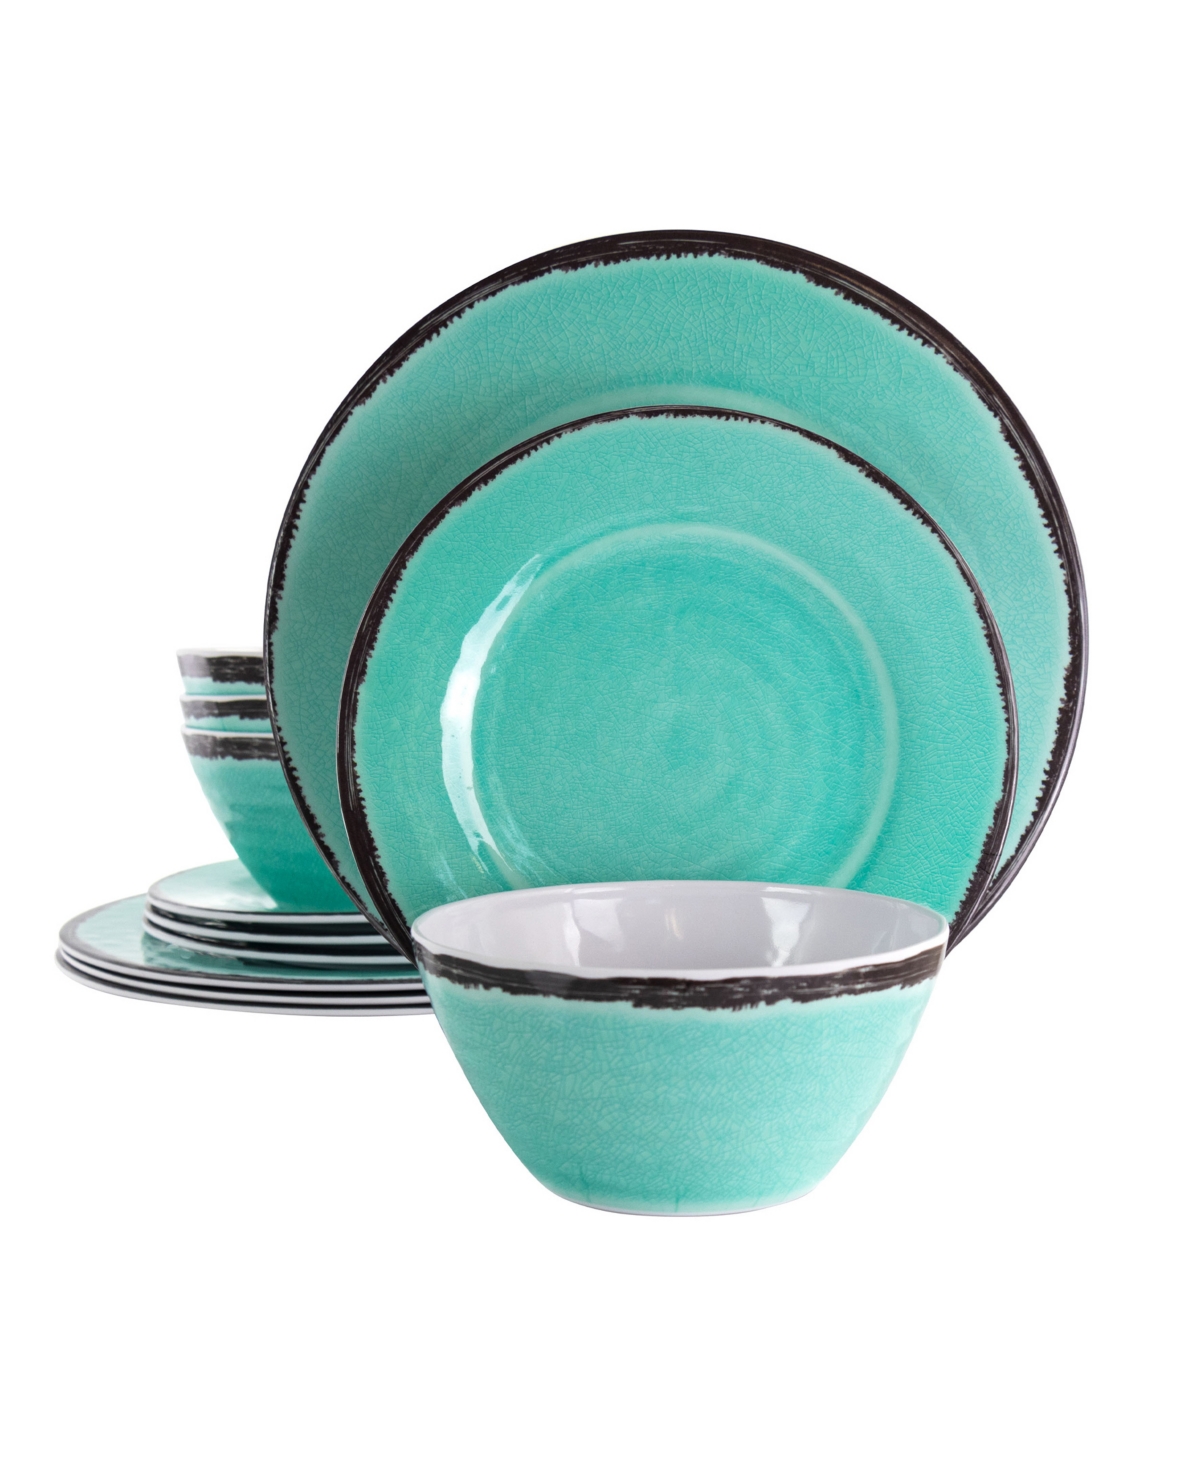 Turquoise 12 Piece Lightweight Melamine Dinnerware Set, Service for 4 - Turquoise